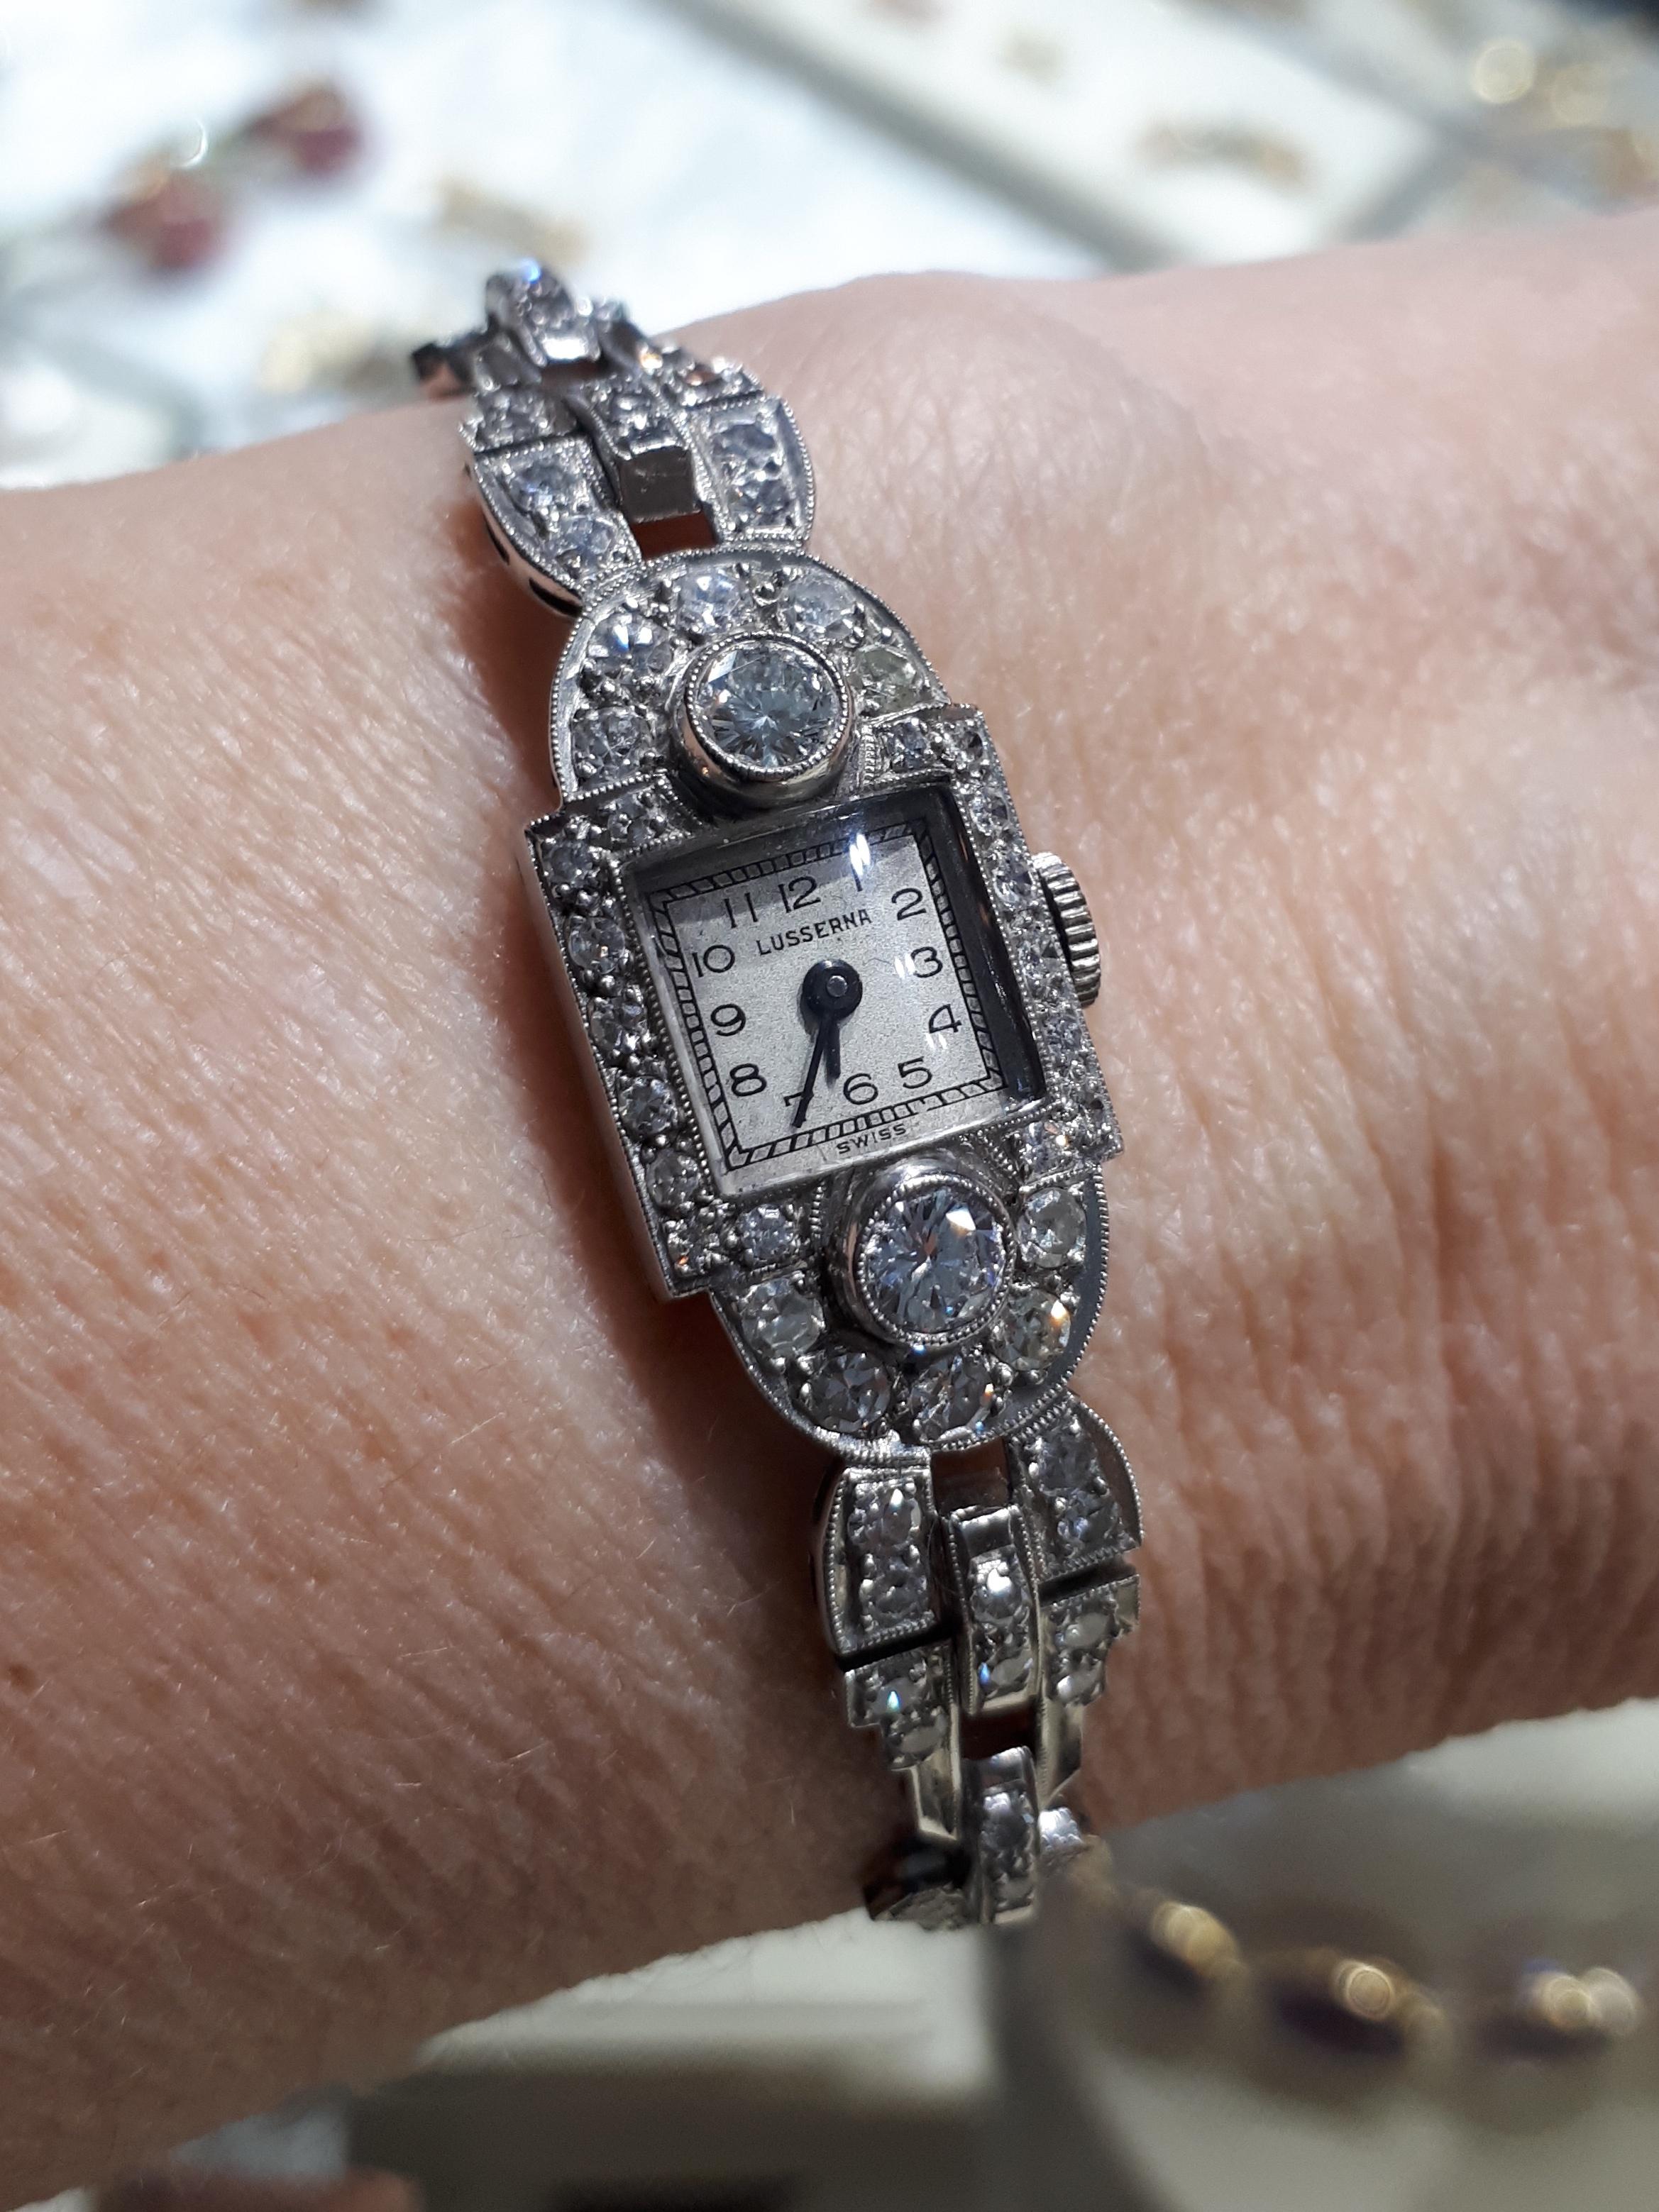 An Art Deco diamond cocktail wristwatch, by Lusserna, with the original, silvered dial, with black enamel Arabic numerals, signed Lusserna, with plain black hands, in a square, two part, platinum case. The square dial is surrounded by eight-cut